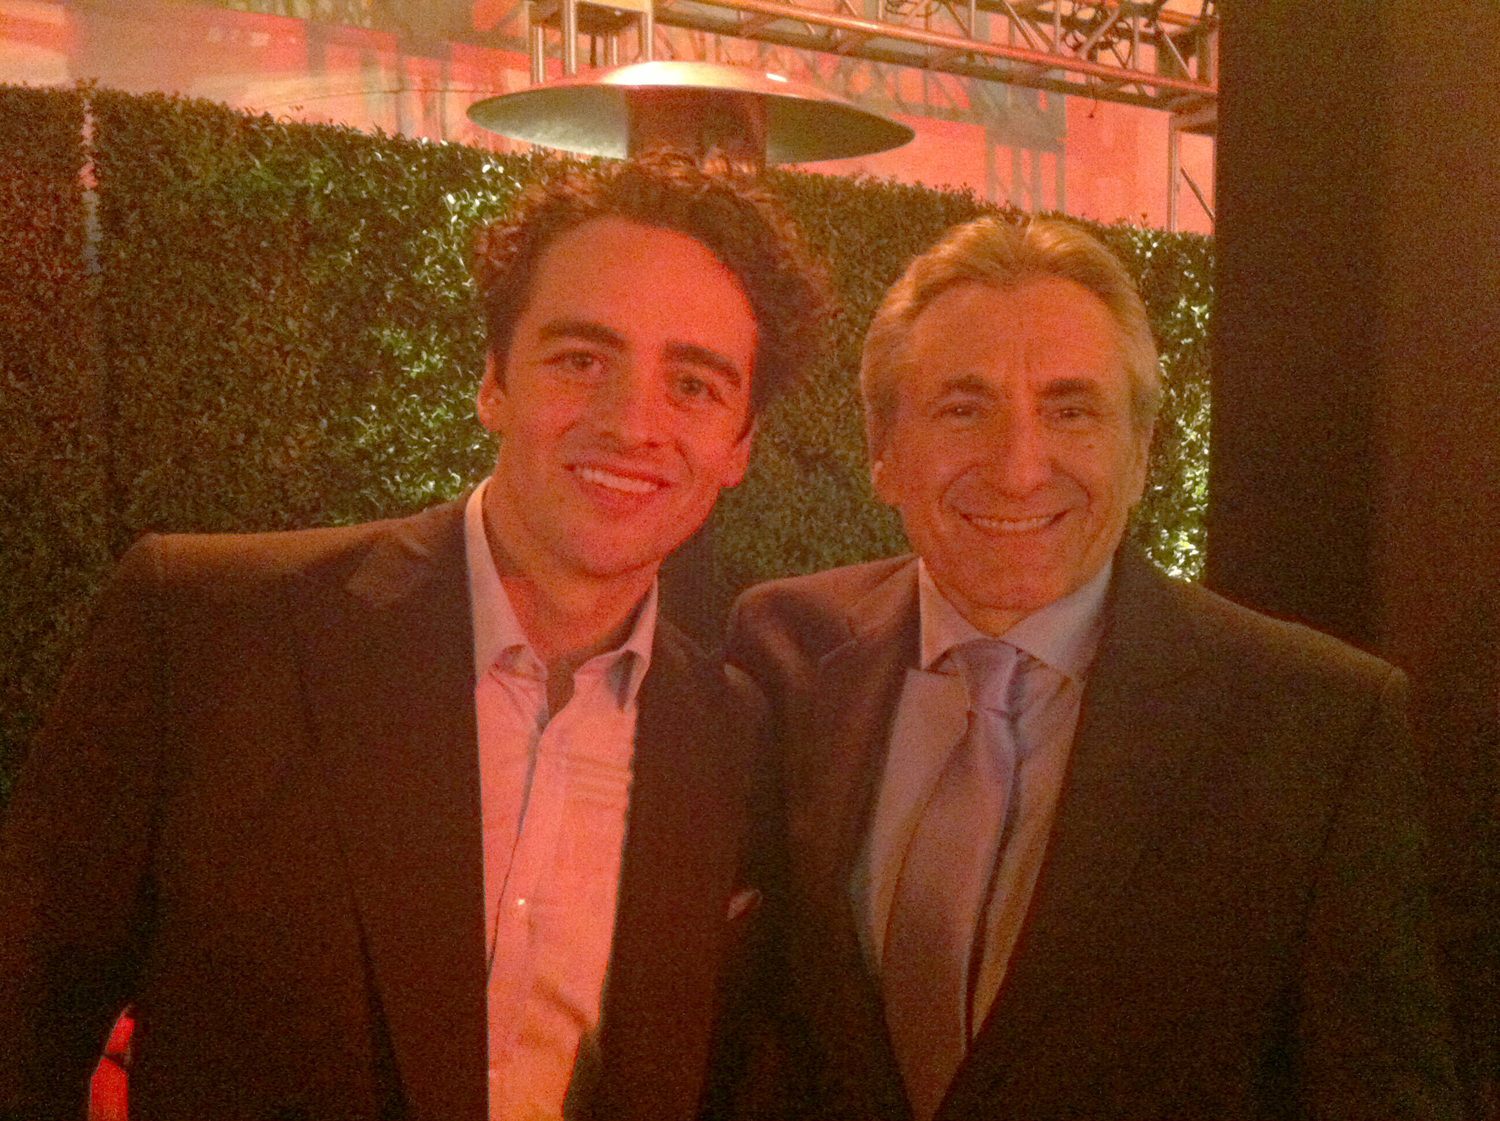 Vincent Piazza & Lou Volpe at the Jersey Boys movie premiere after party.